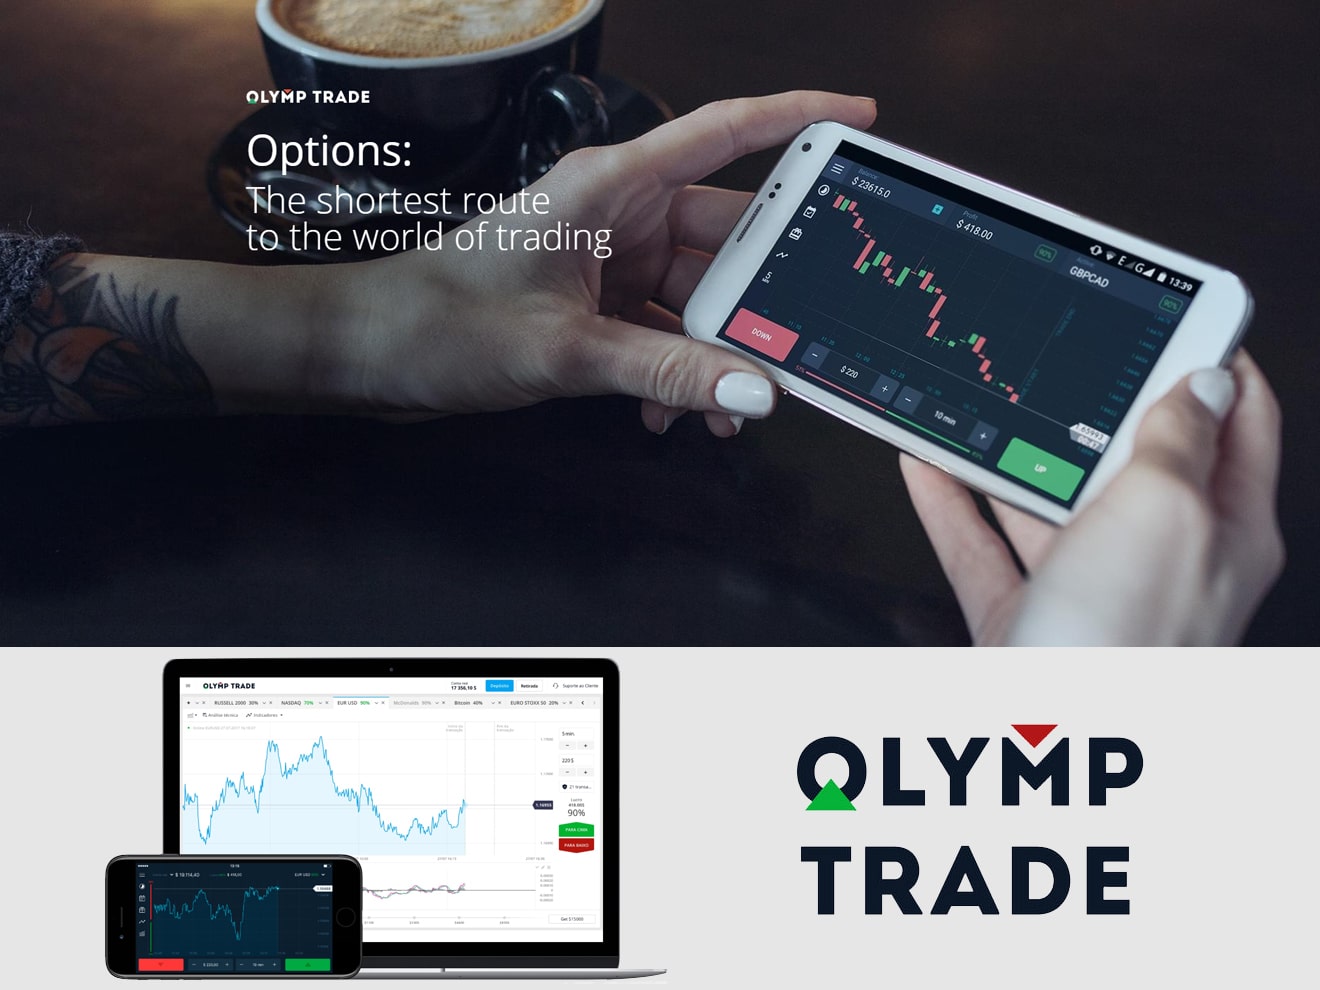 Olymp Trade: Are they SCAM or Not? 10 reasons to prove it!